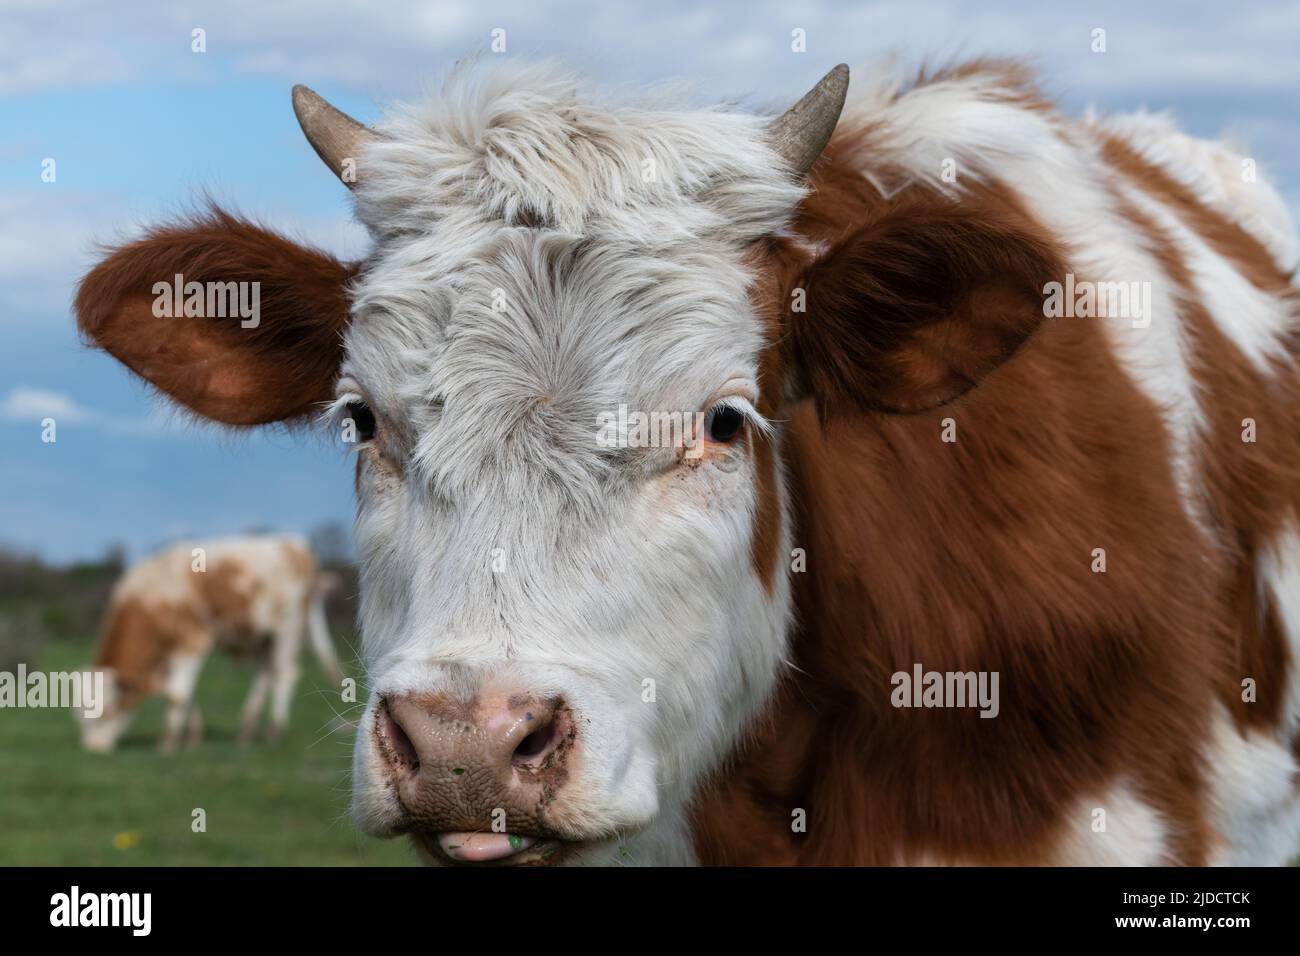 Close up cow head with small horns stare toward camera, domestic animal body part, brown and white hair Stock Photo